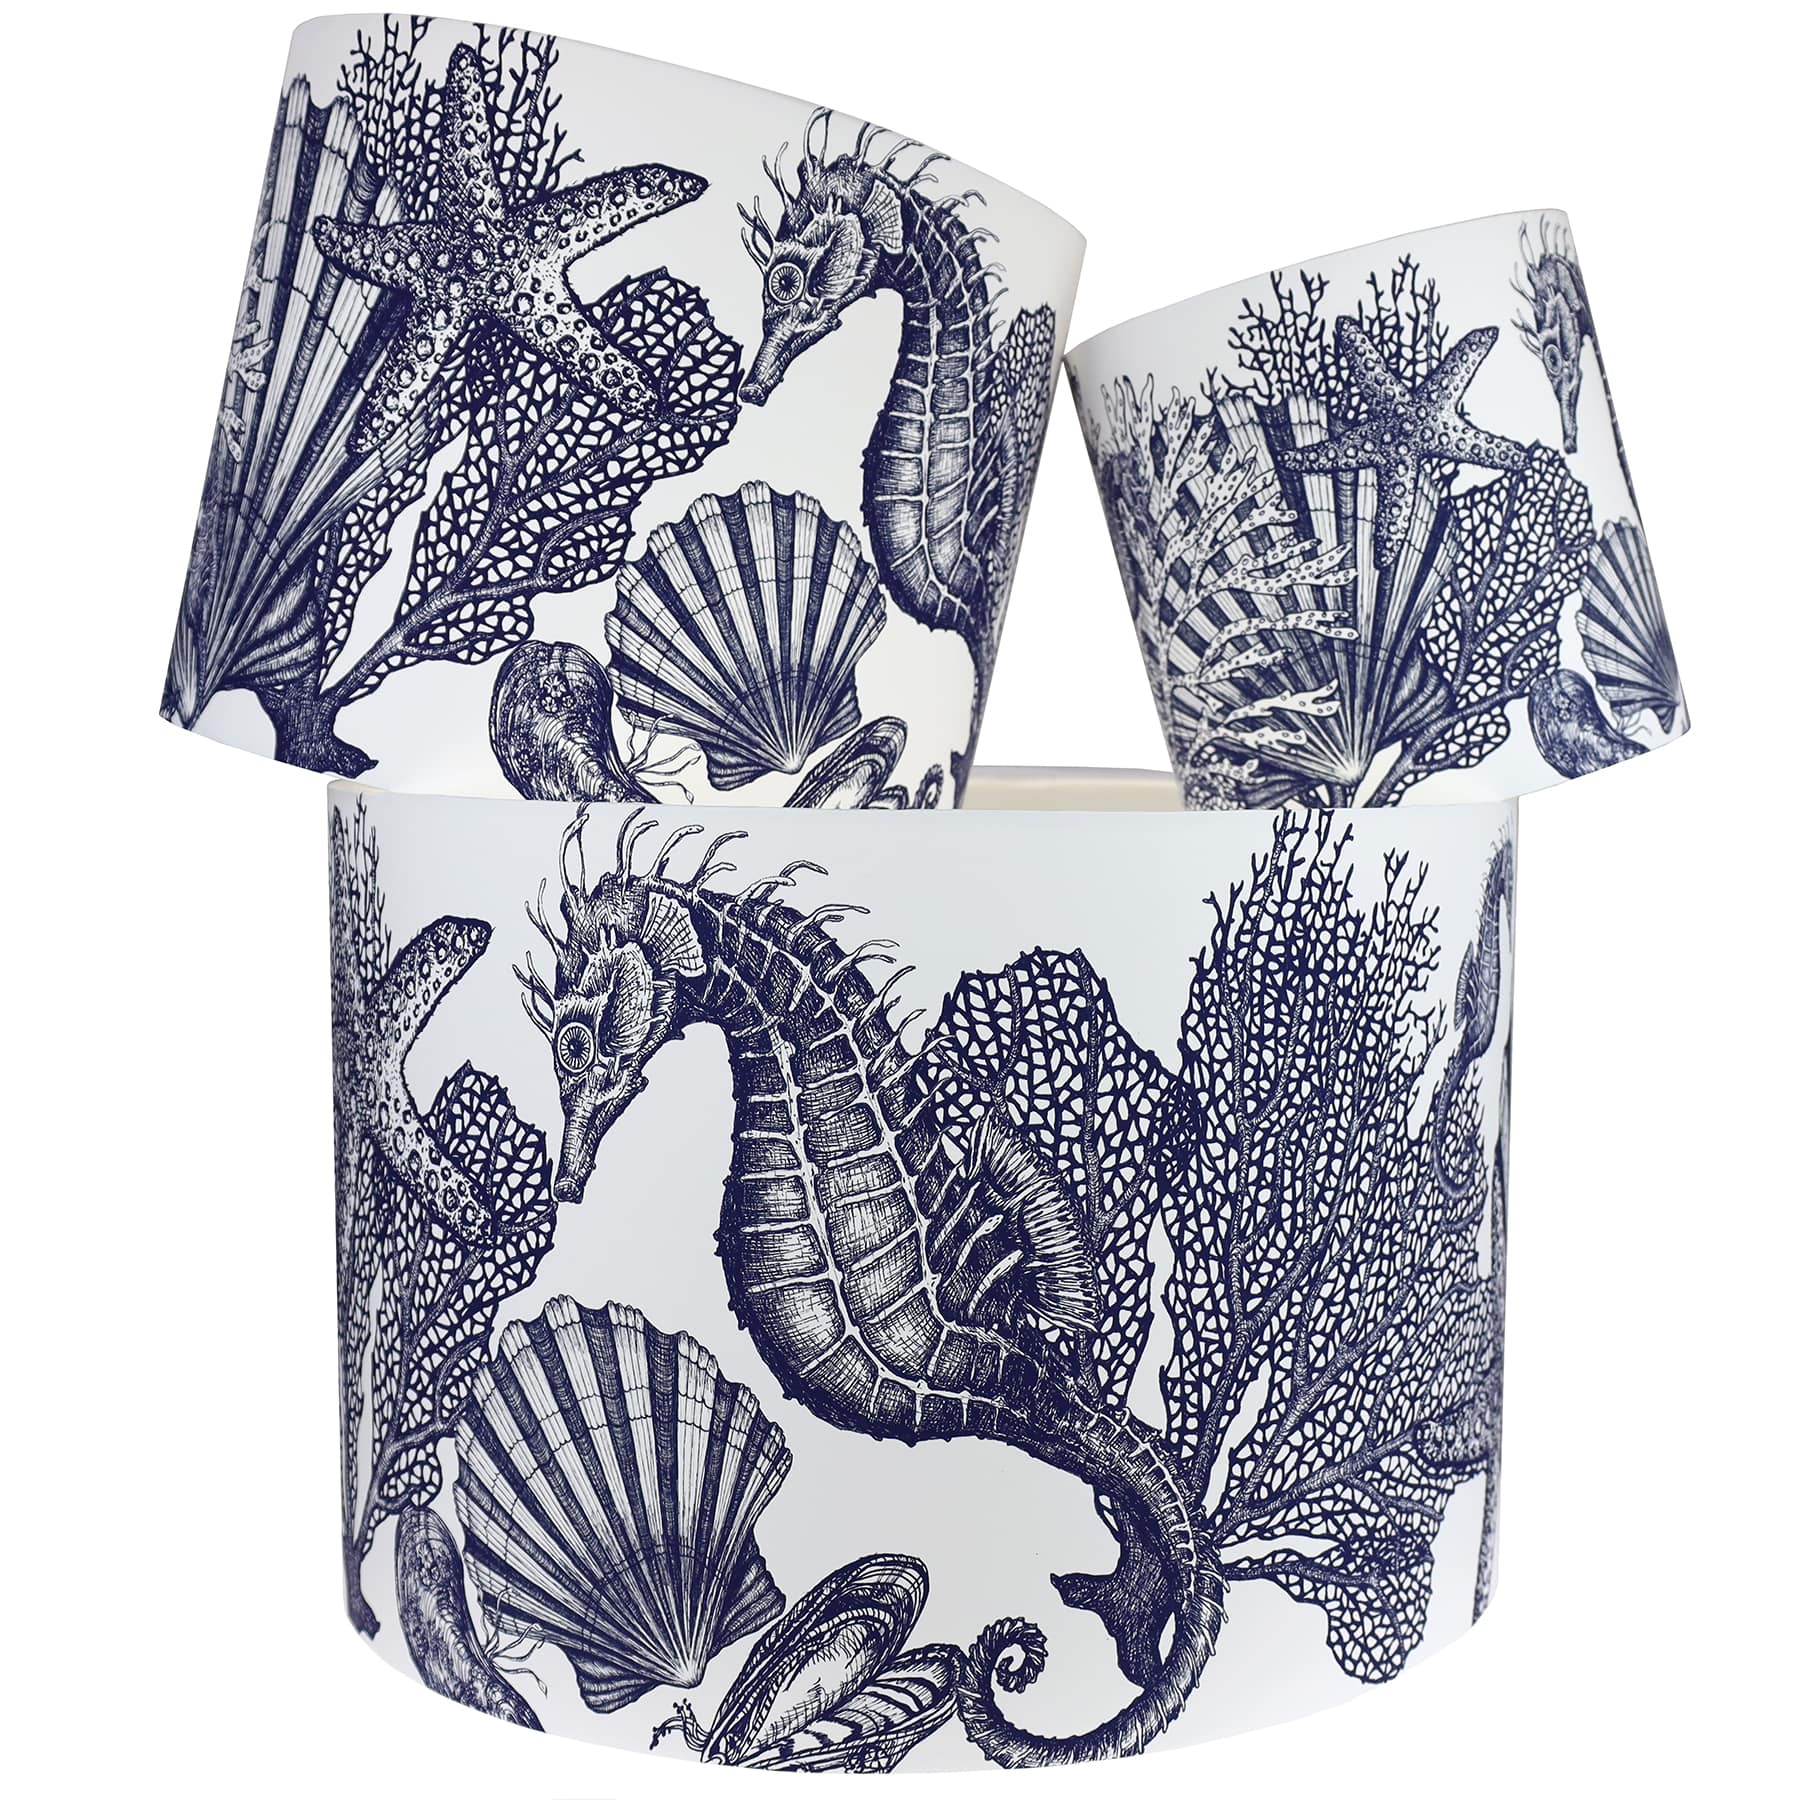 Our Classic Navy Seahorse design on a white background.The lampshades are shown in a stack of three showing all three sizes.